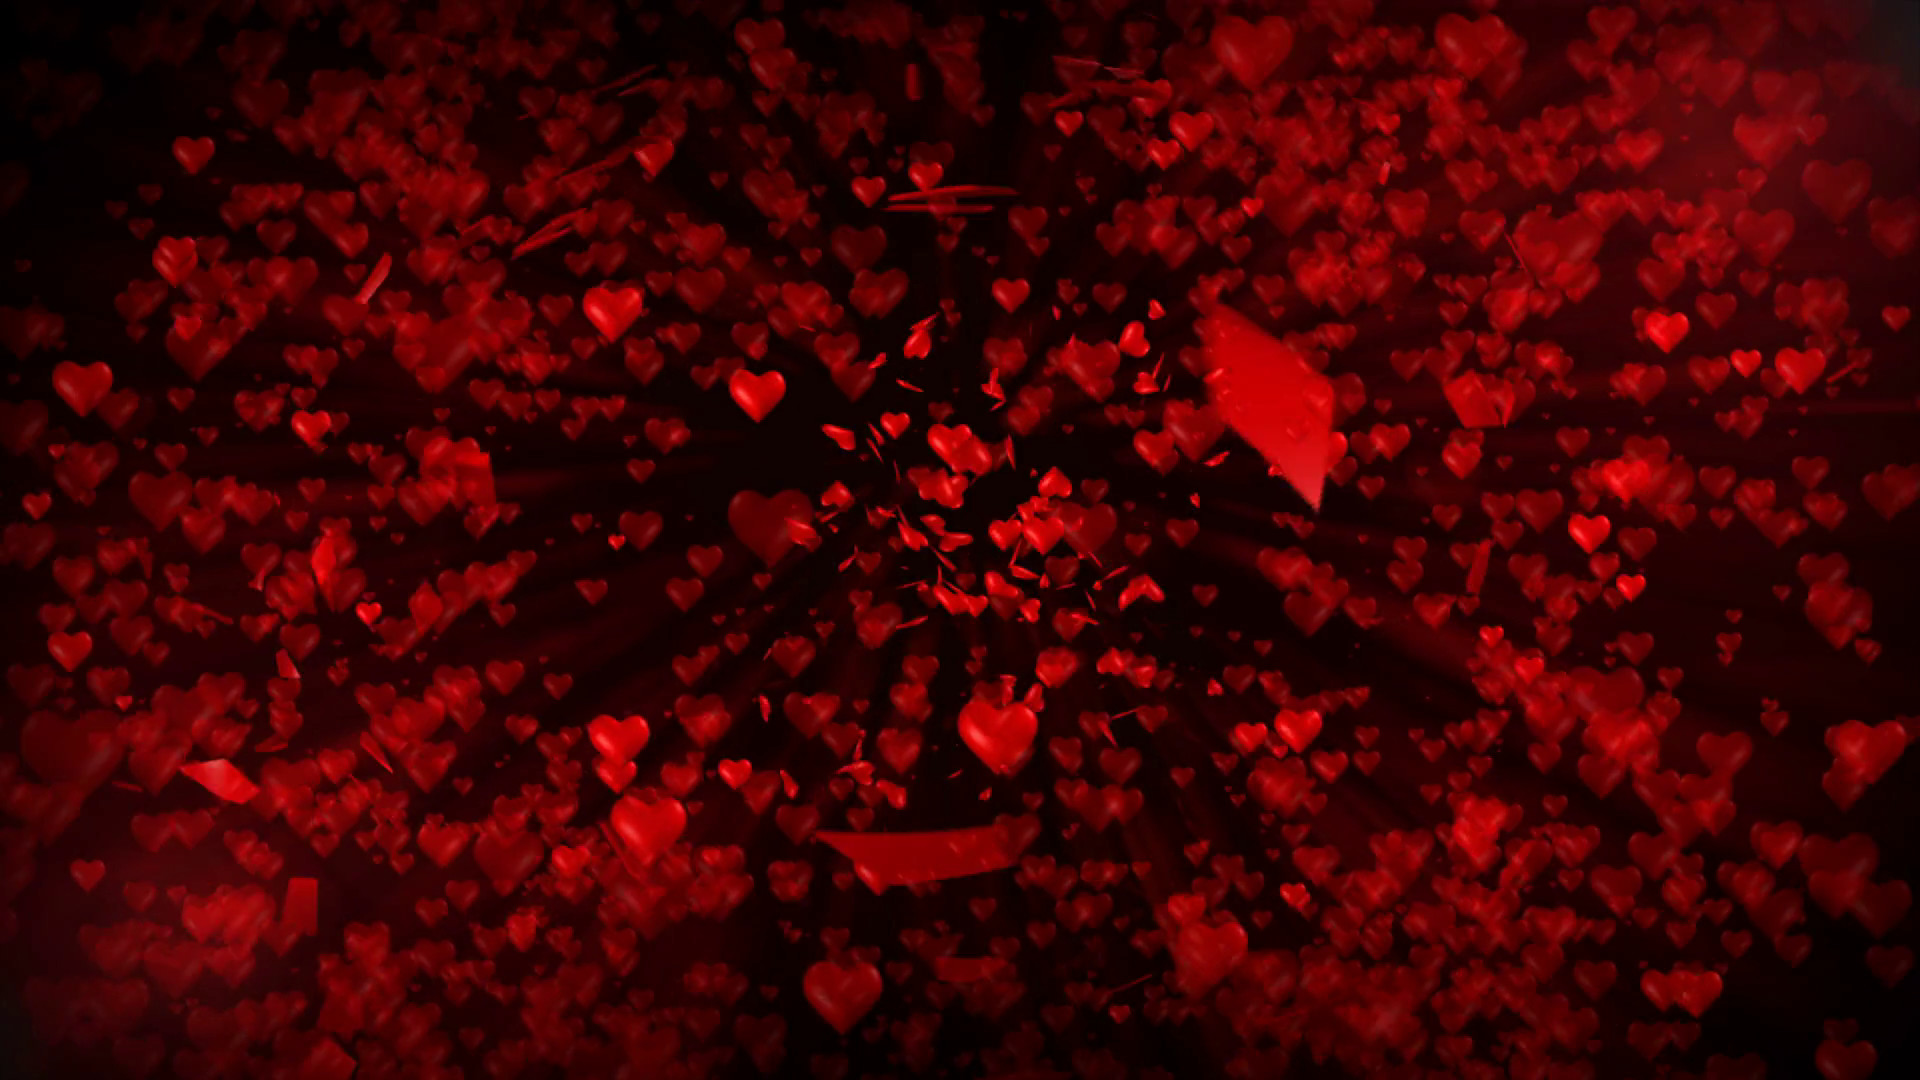 1920x1080 3d animation of giant romantic red heart growing larger and burst into  little red hearts pattern. Abstract heart background pattern in love and  valentine ...